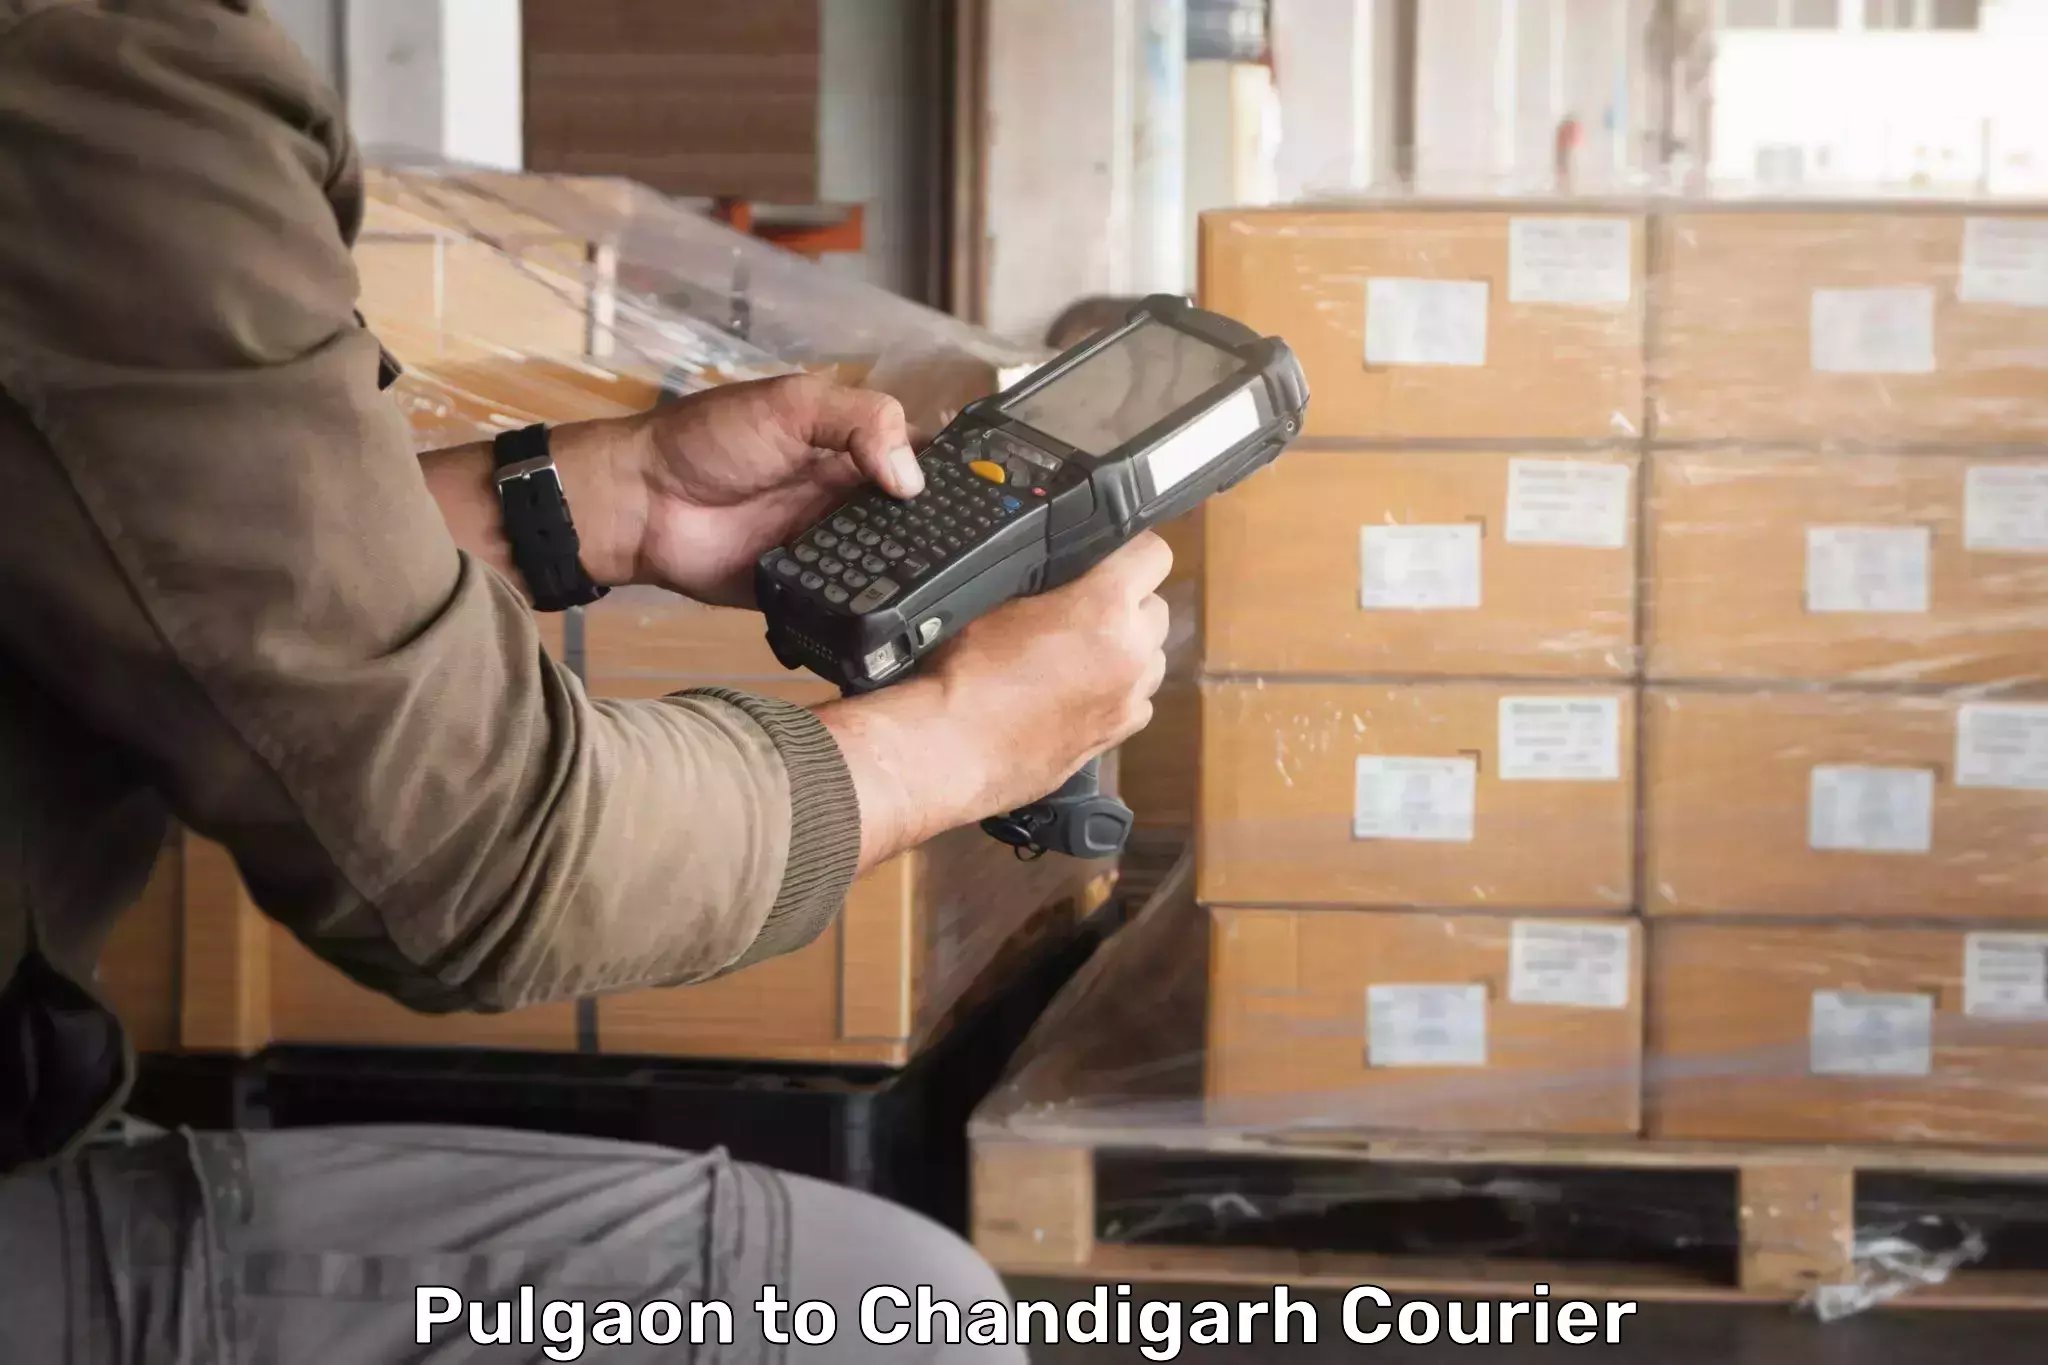 Express mail service Pulgaon to Chandigarh